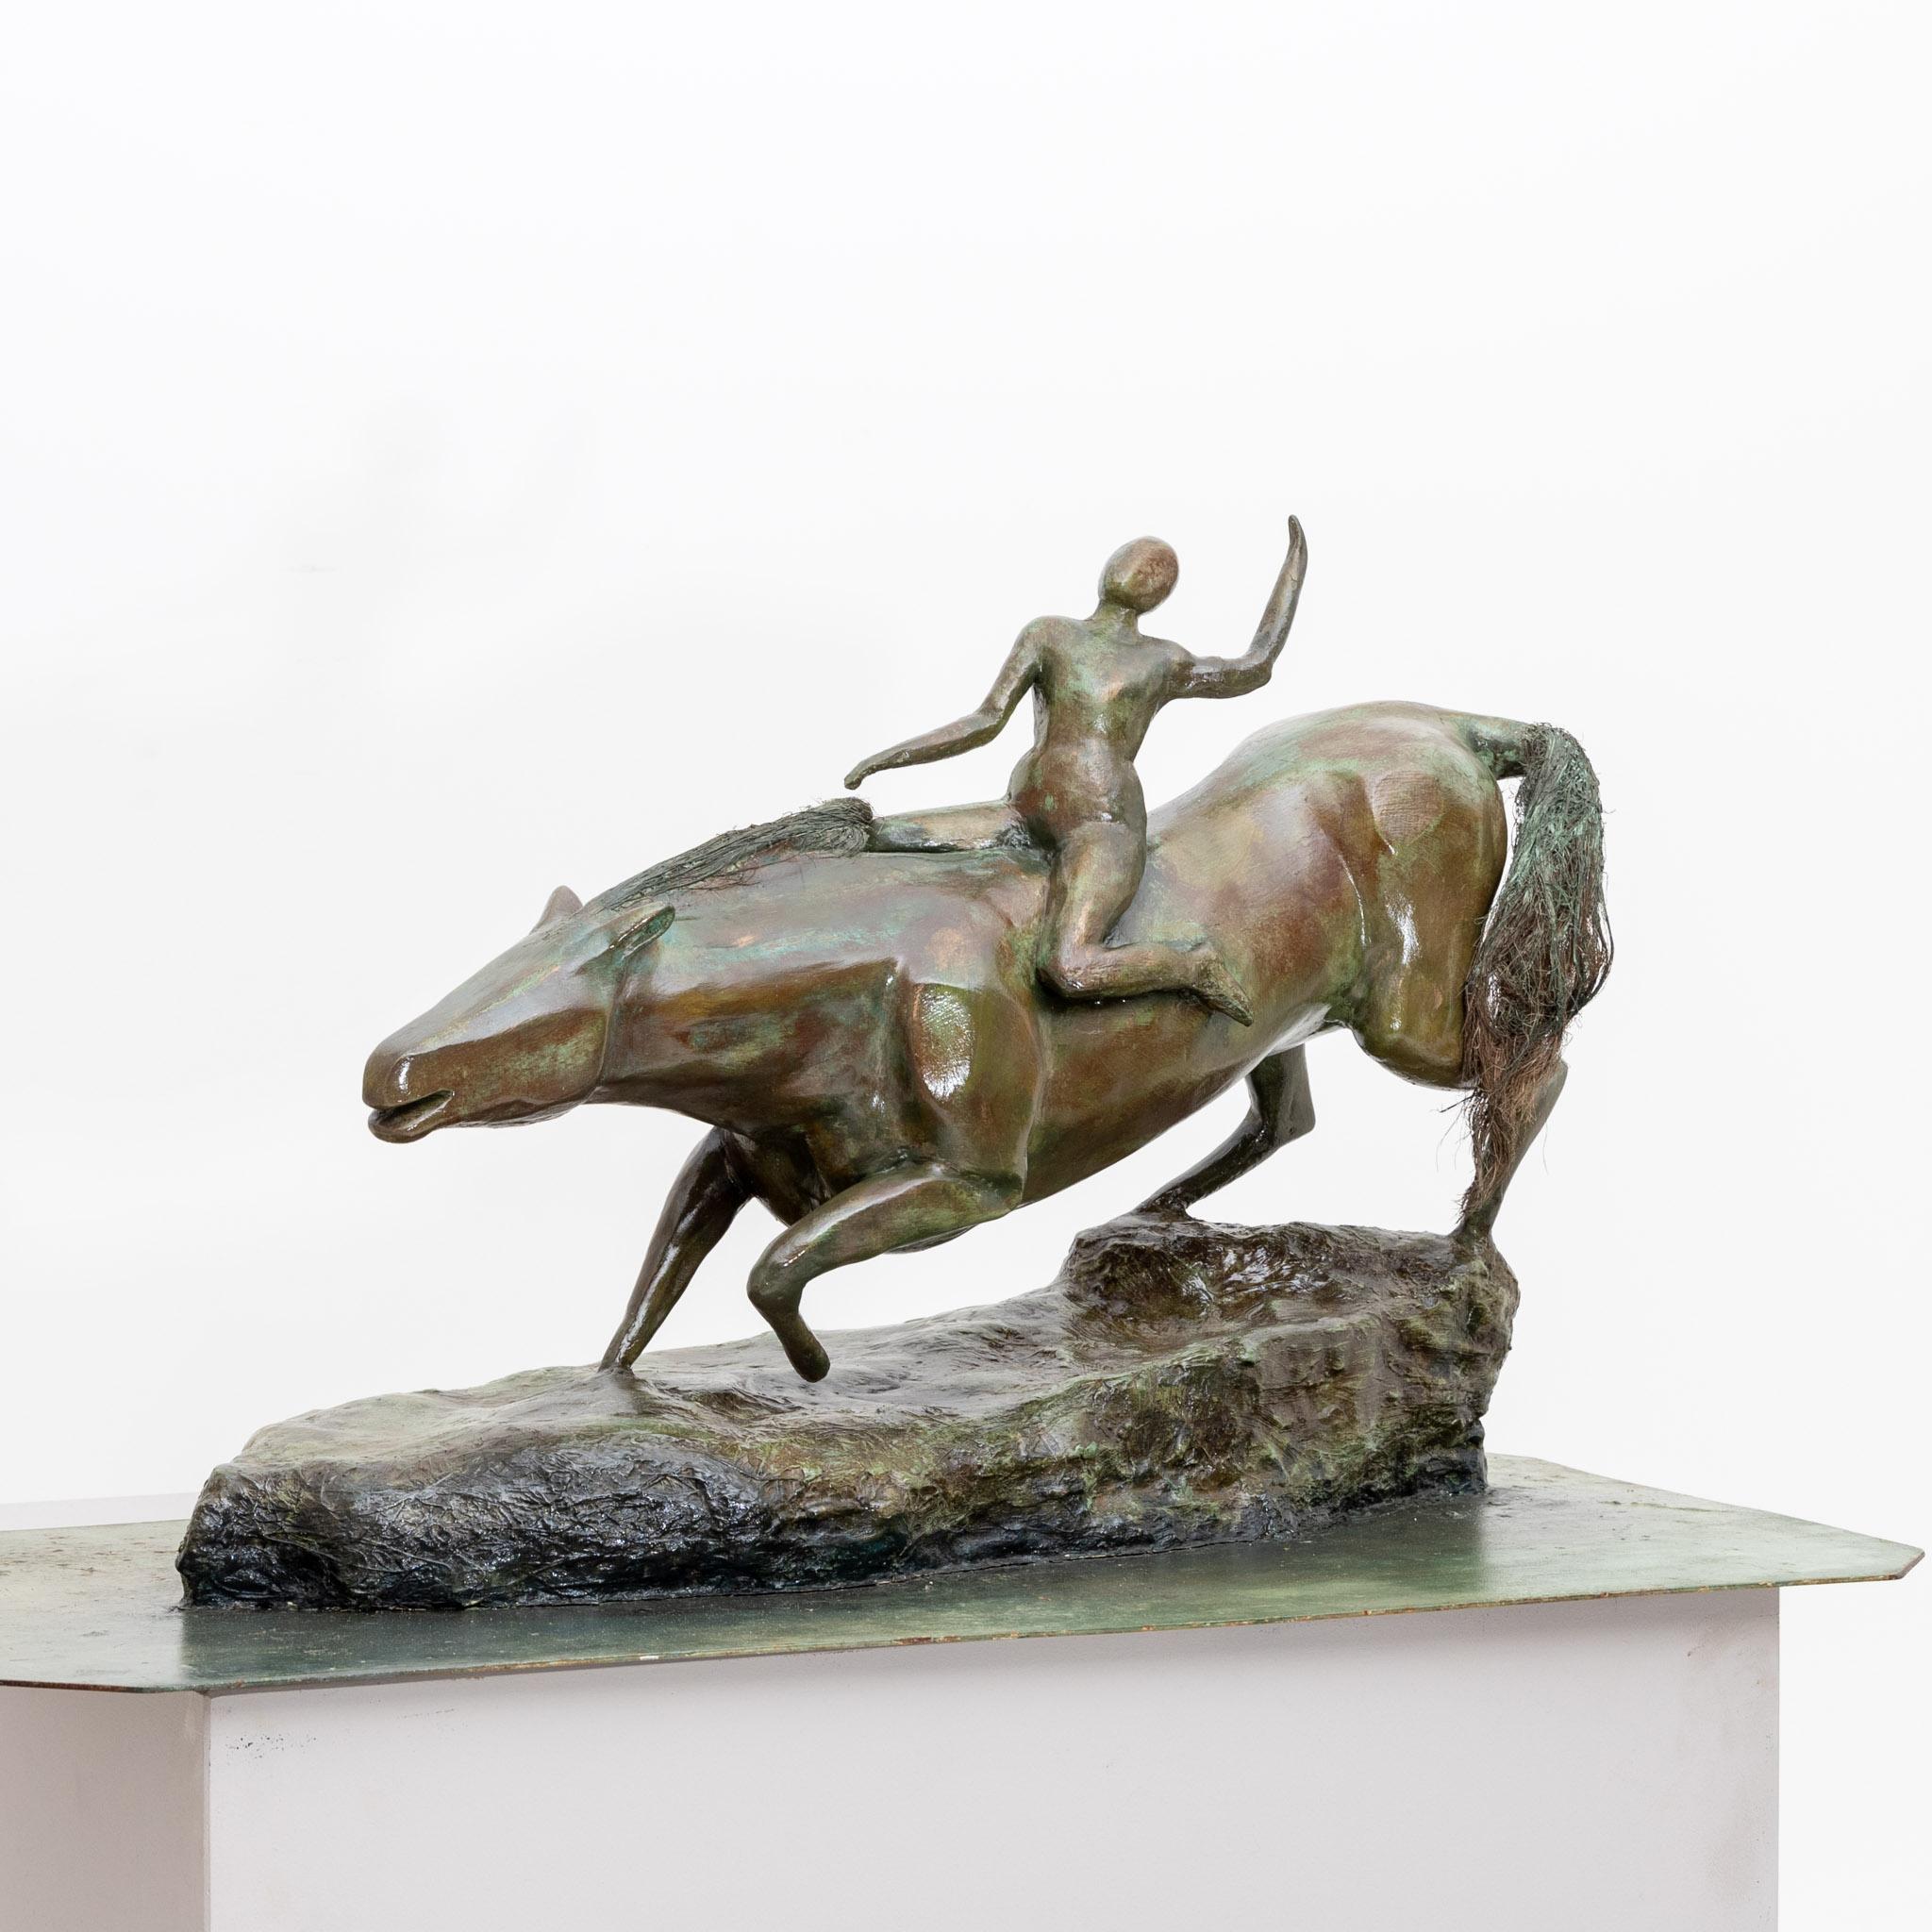 Bronzed modernist plaster sculpture of a rider with a horse, probably France mid-20th century. The plaster model has a metal plate as a base.